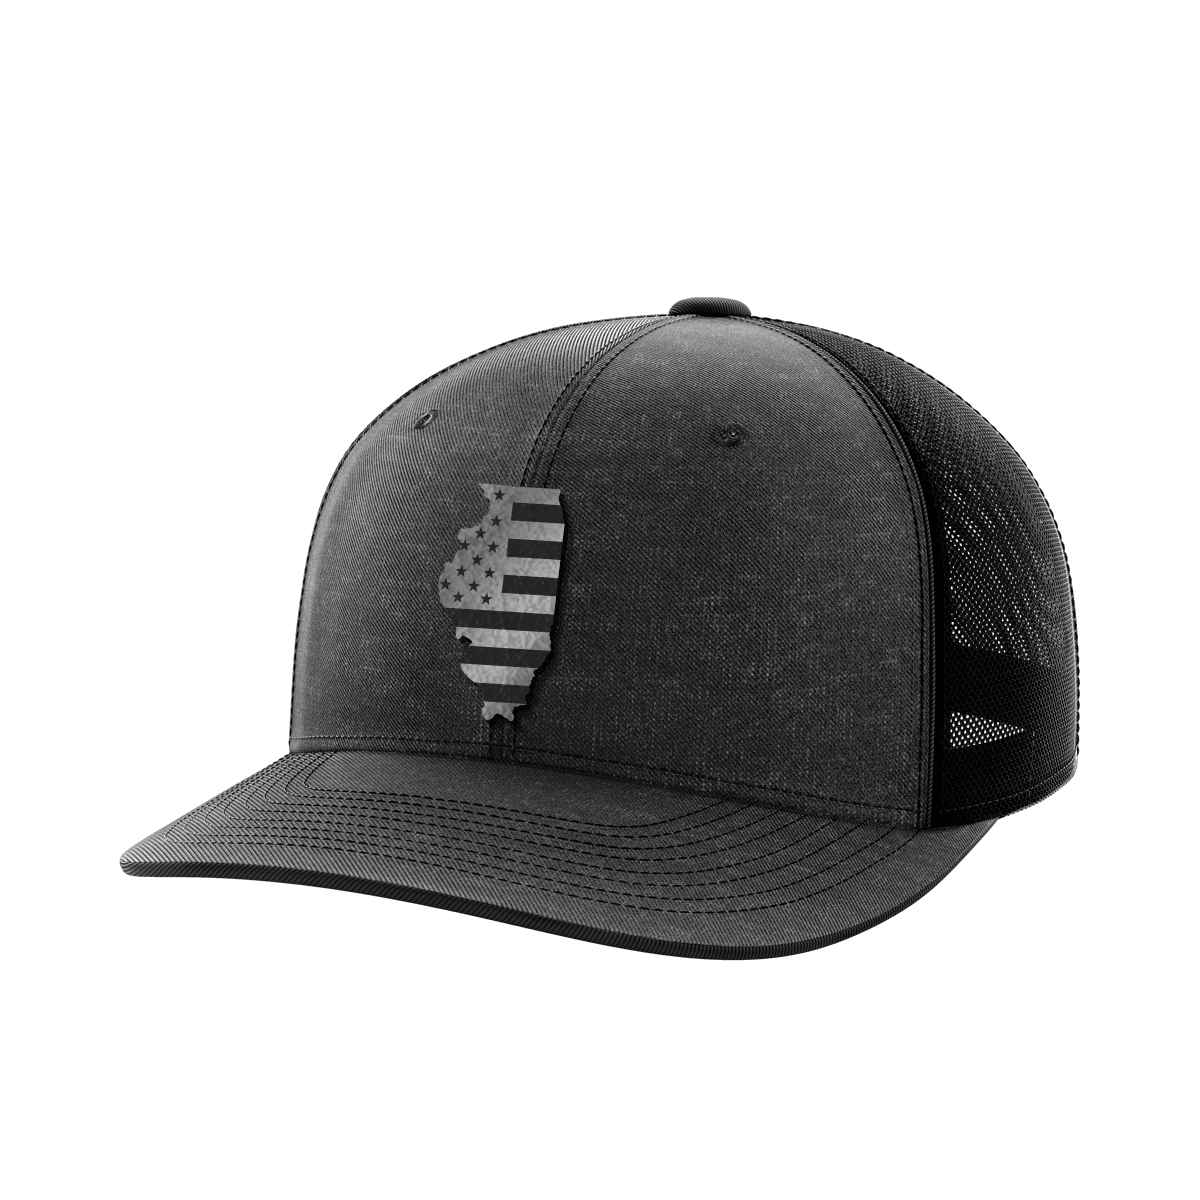 Illinois United Collection (black leather) - Greater Half